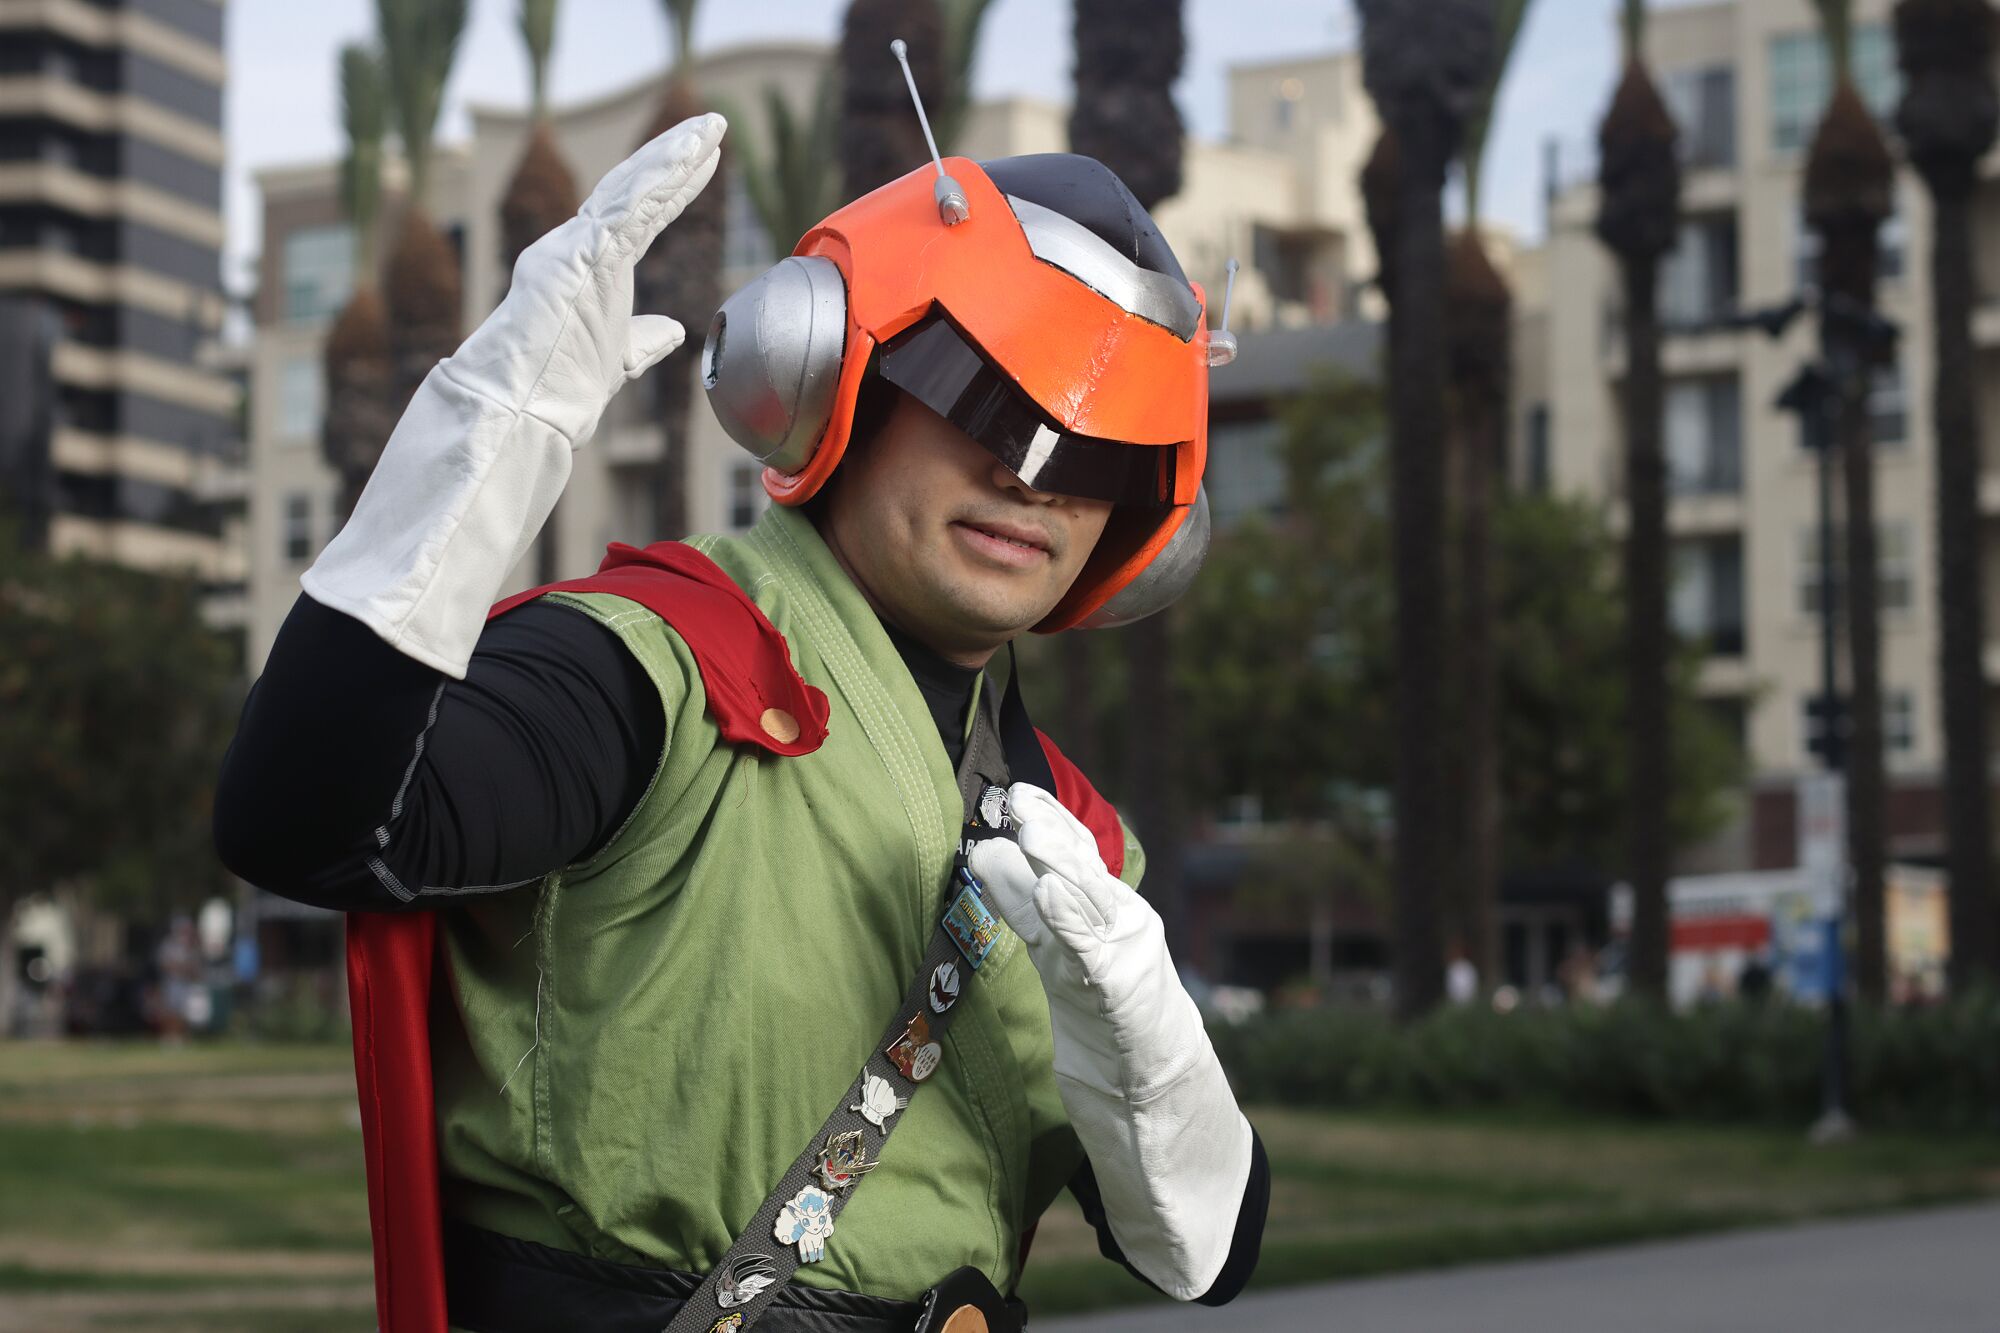 Kyle Robles cosplayed as the Great Saiyaman from "Dragon Ball Z."